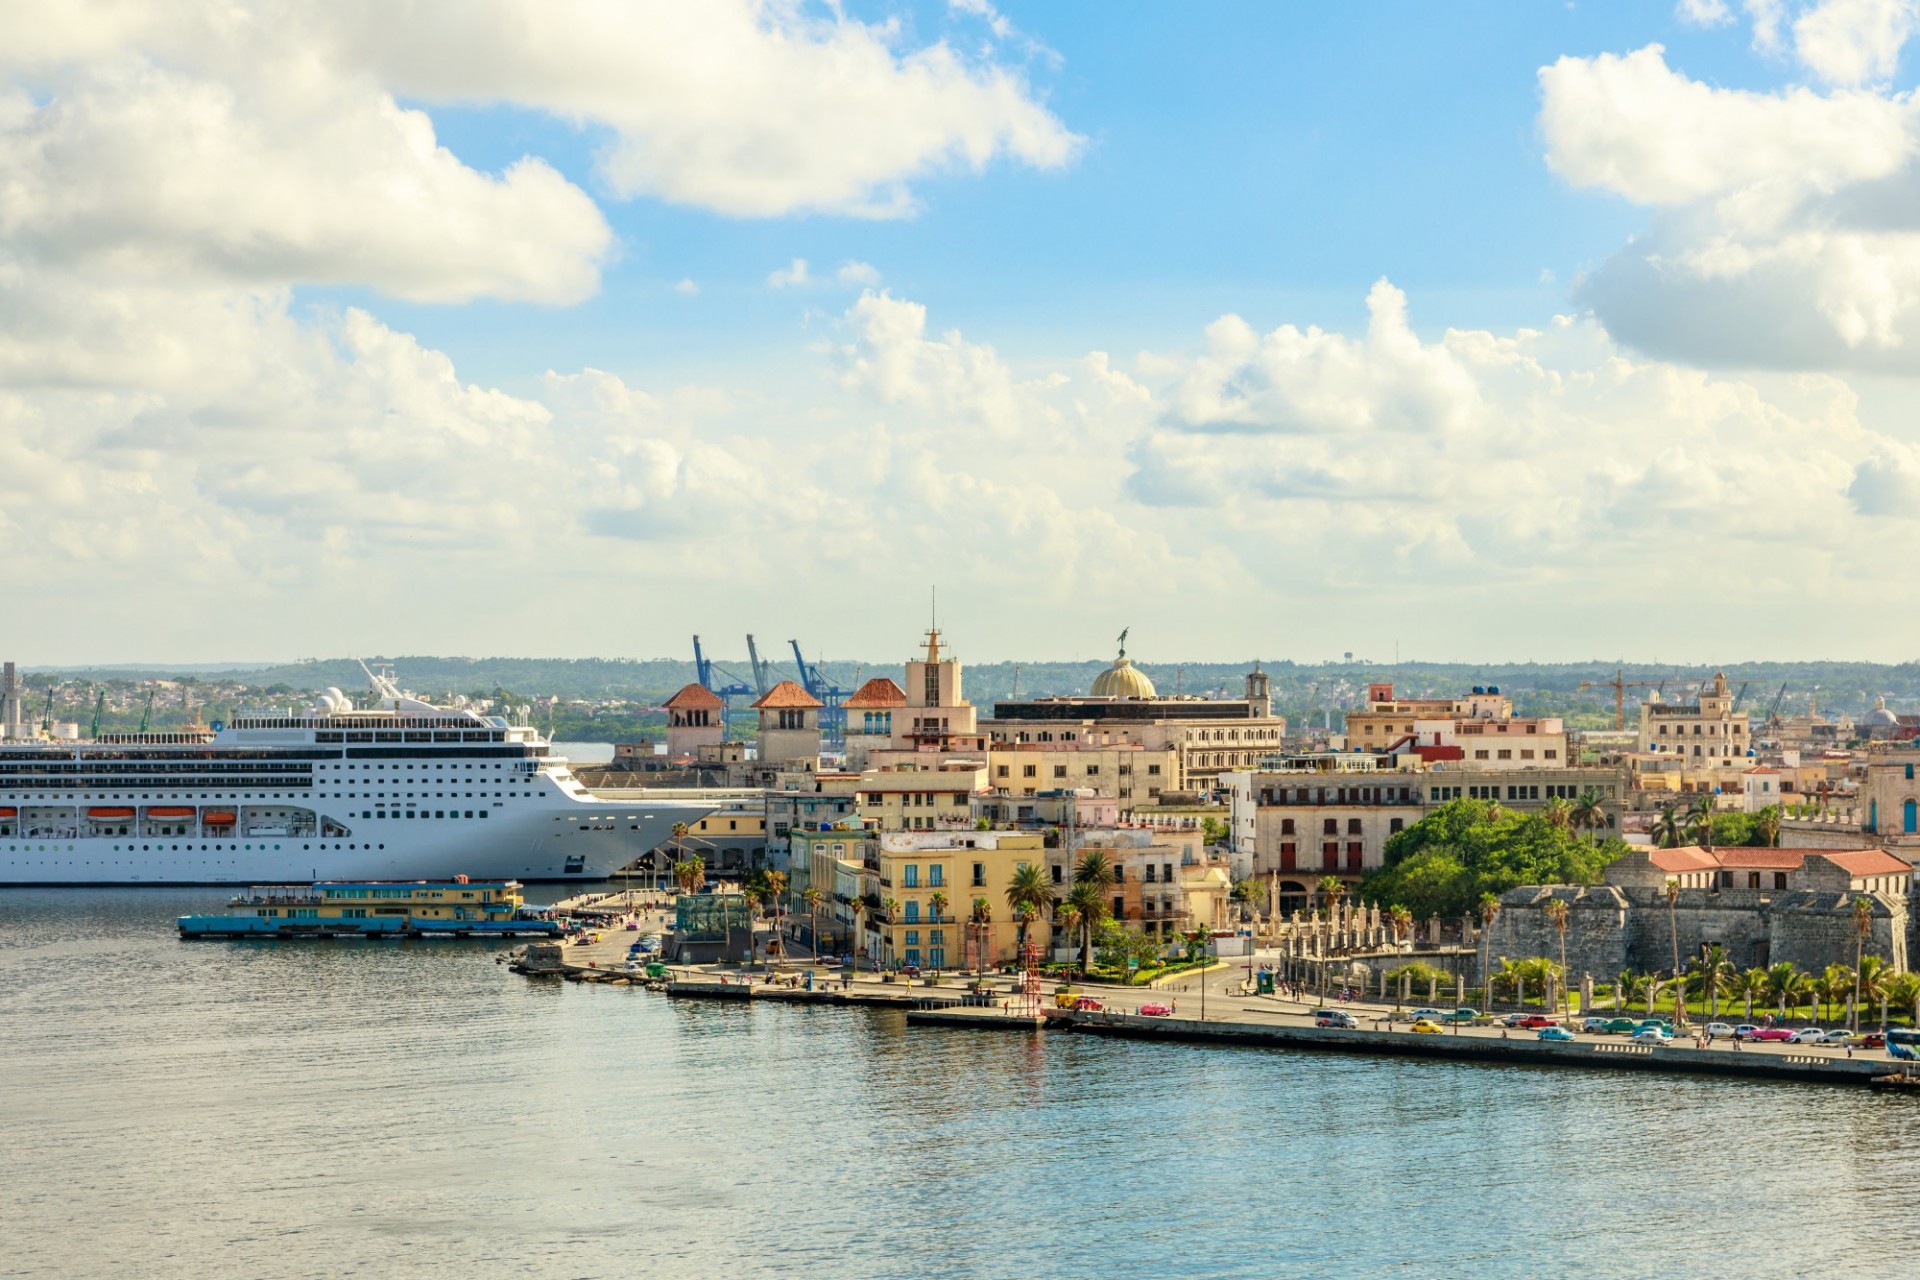 Cruise ship docking in Havana Cuba with blue sky and white clouds